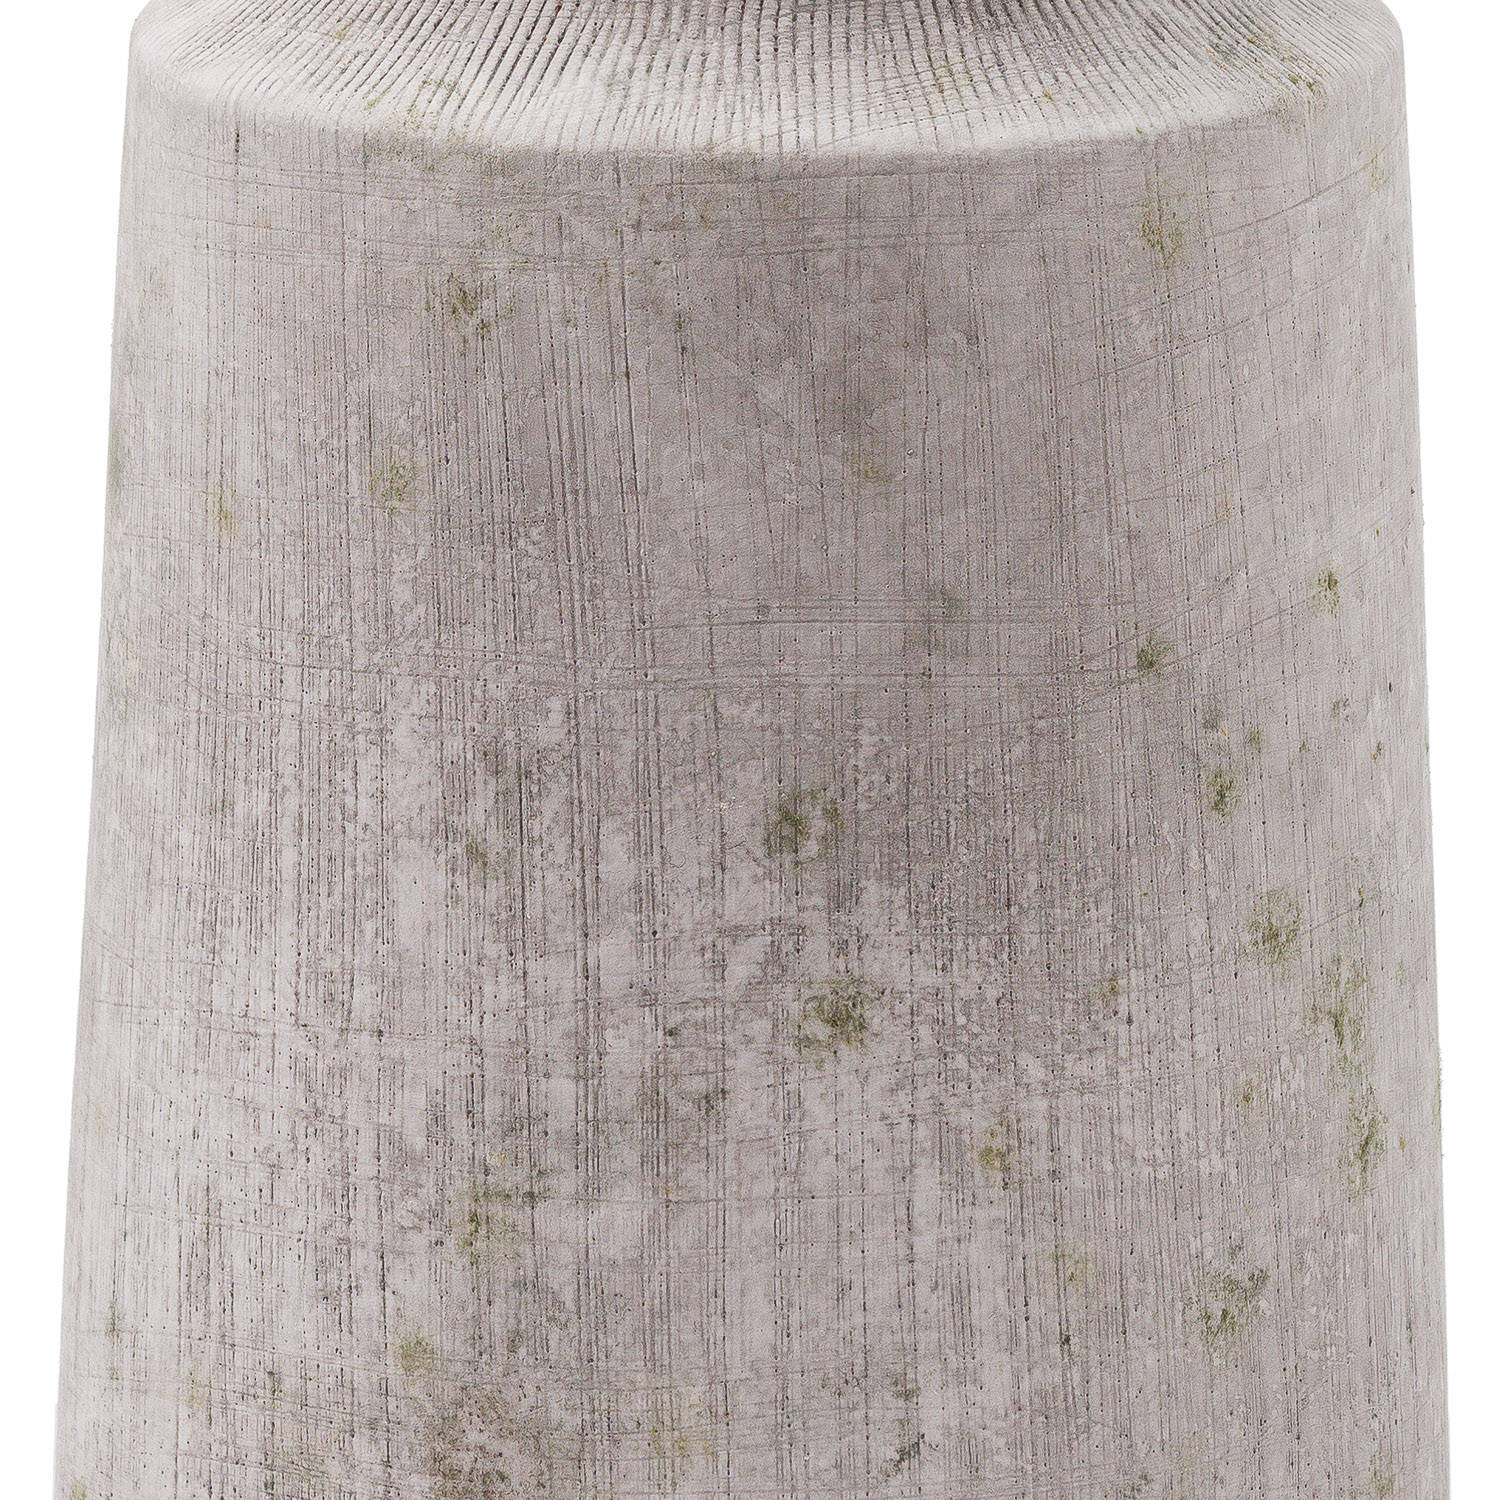 bloomville-urn-stone-vase_20723-a fabric from JLP